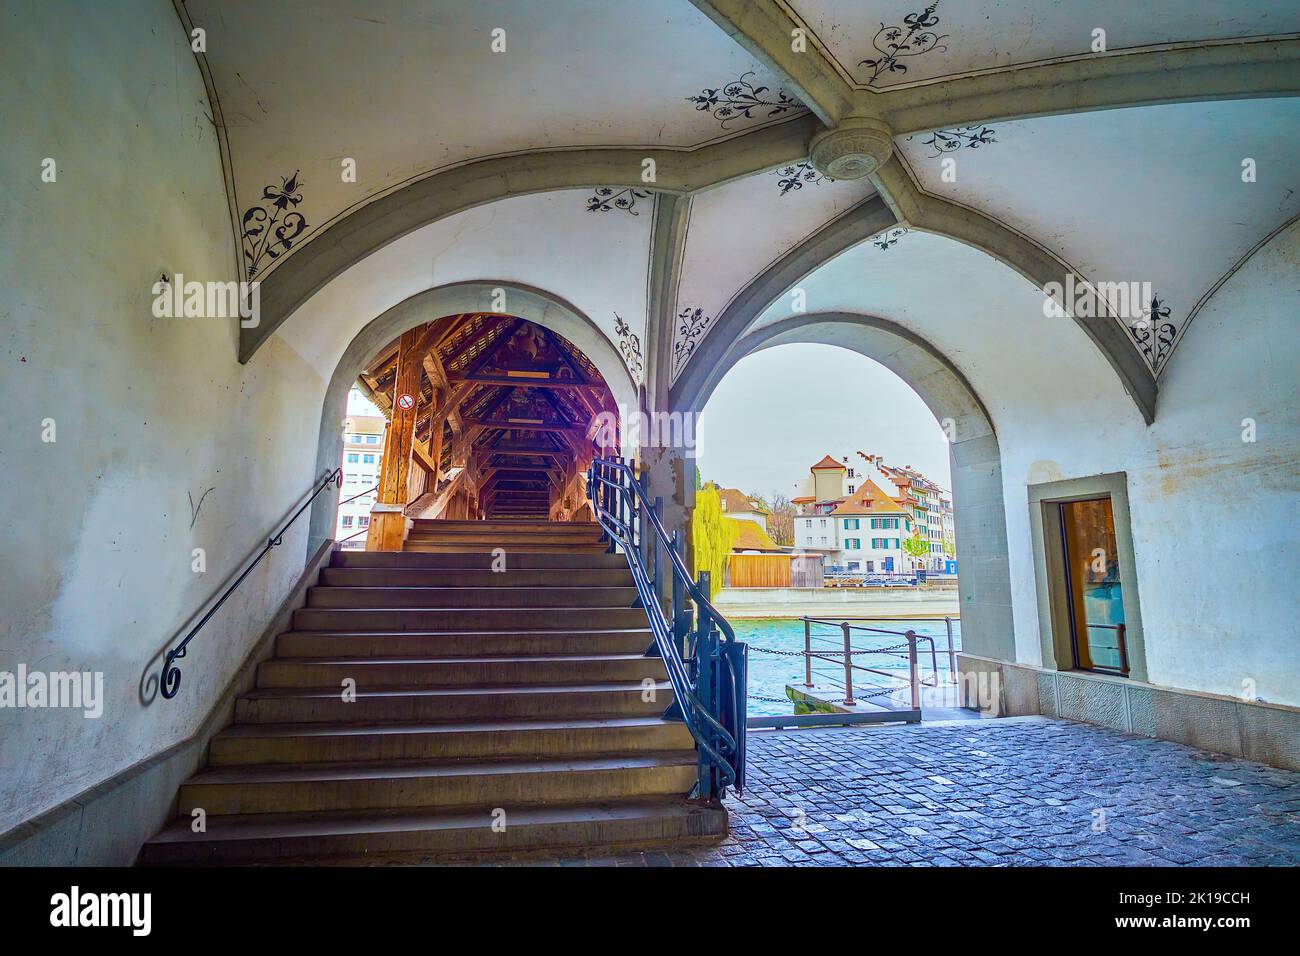 The entrance to medieval Spreuerbrucke bridge from the lower floor of historical building on Pfistergasse street in Lucerne, Switzerland Stock Photo